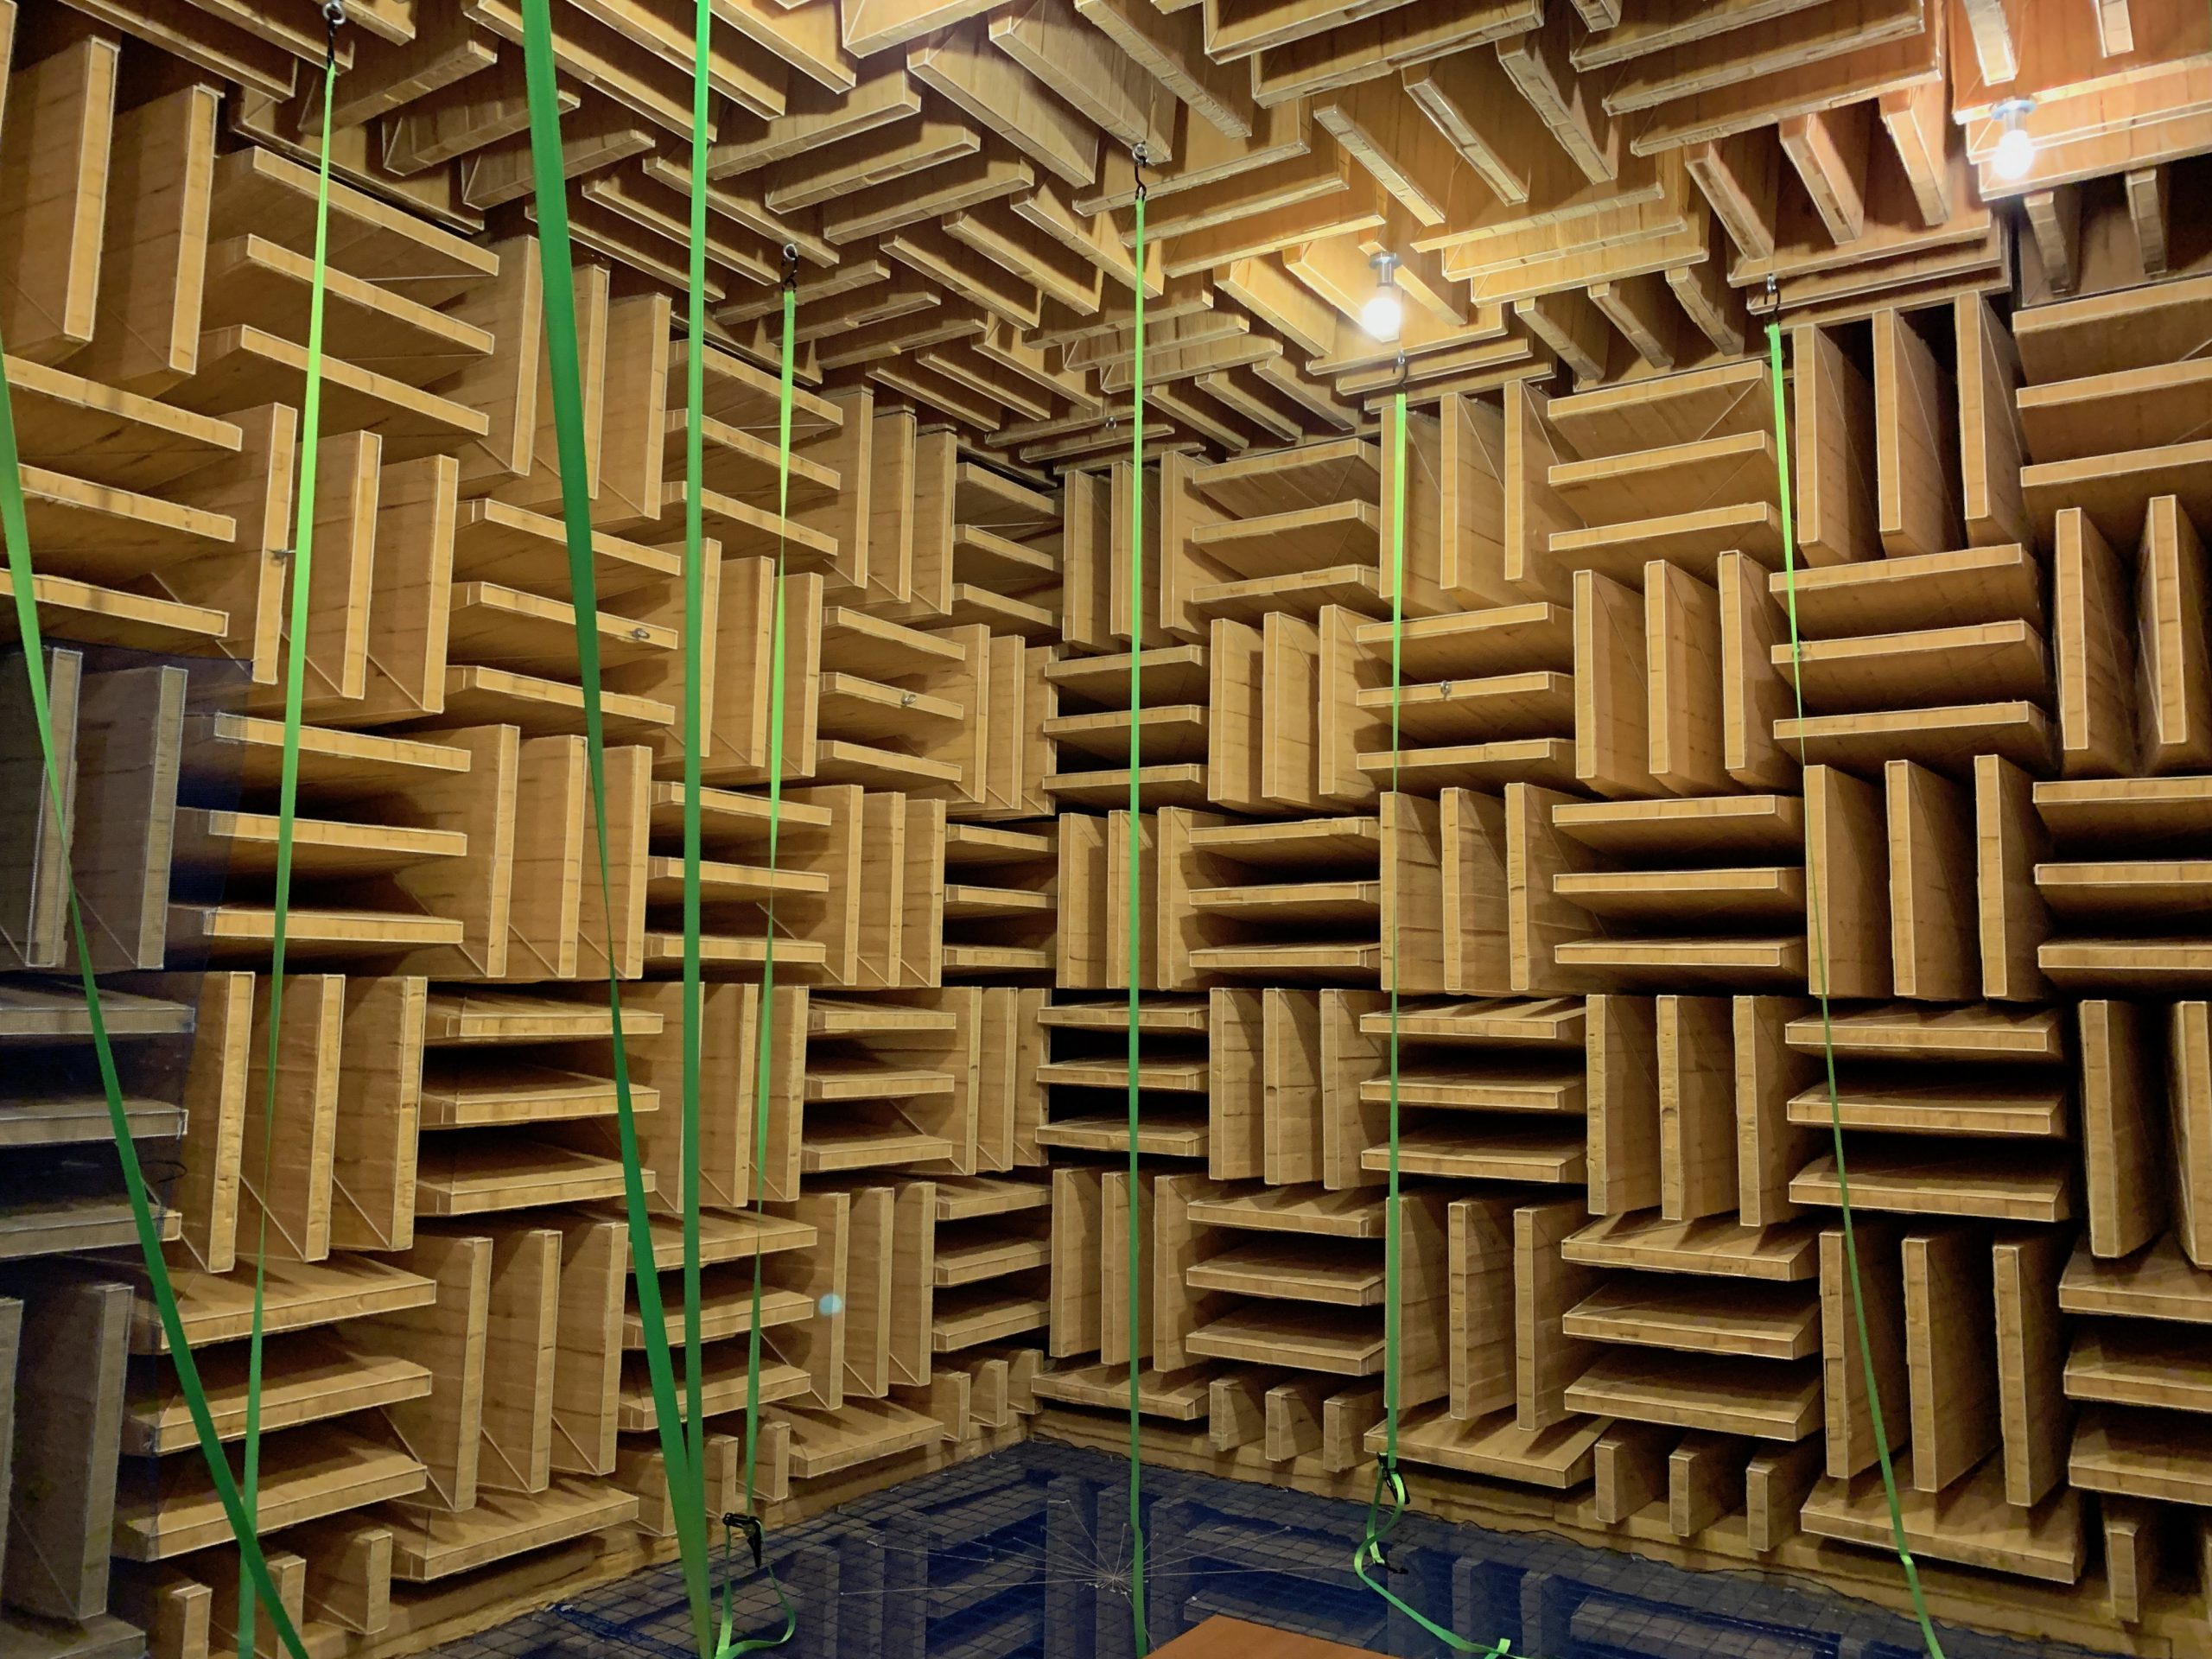 Anechoic Chamber at Roland R&D, Photo by Adam Douglas